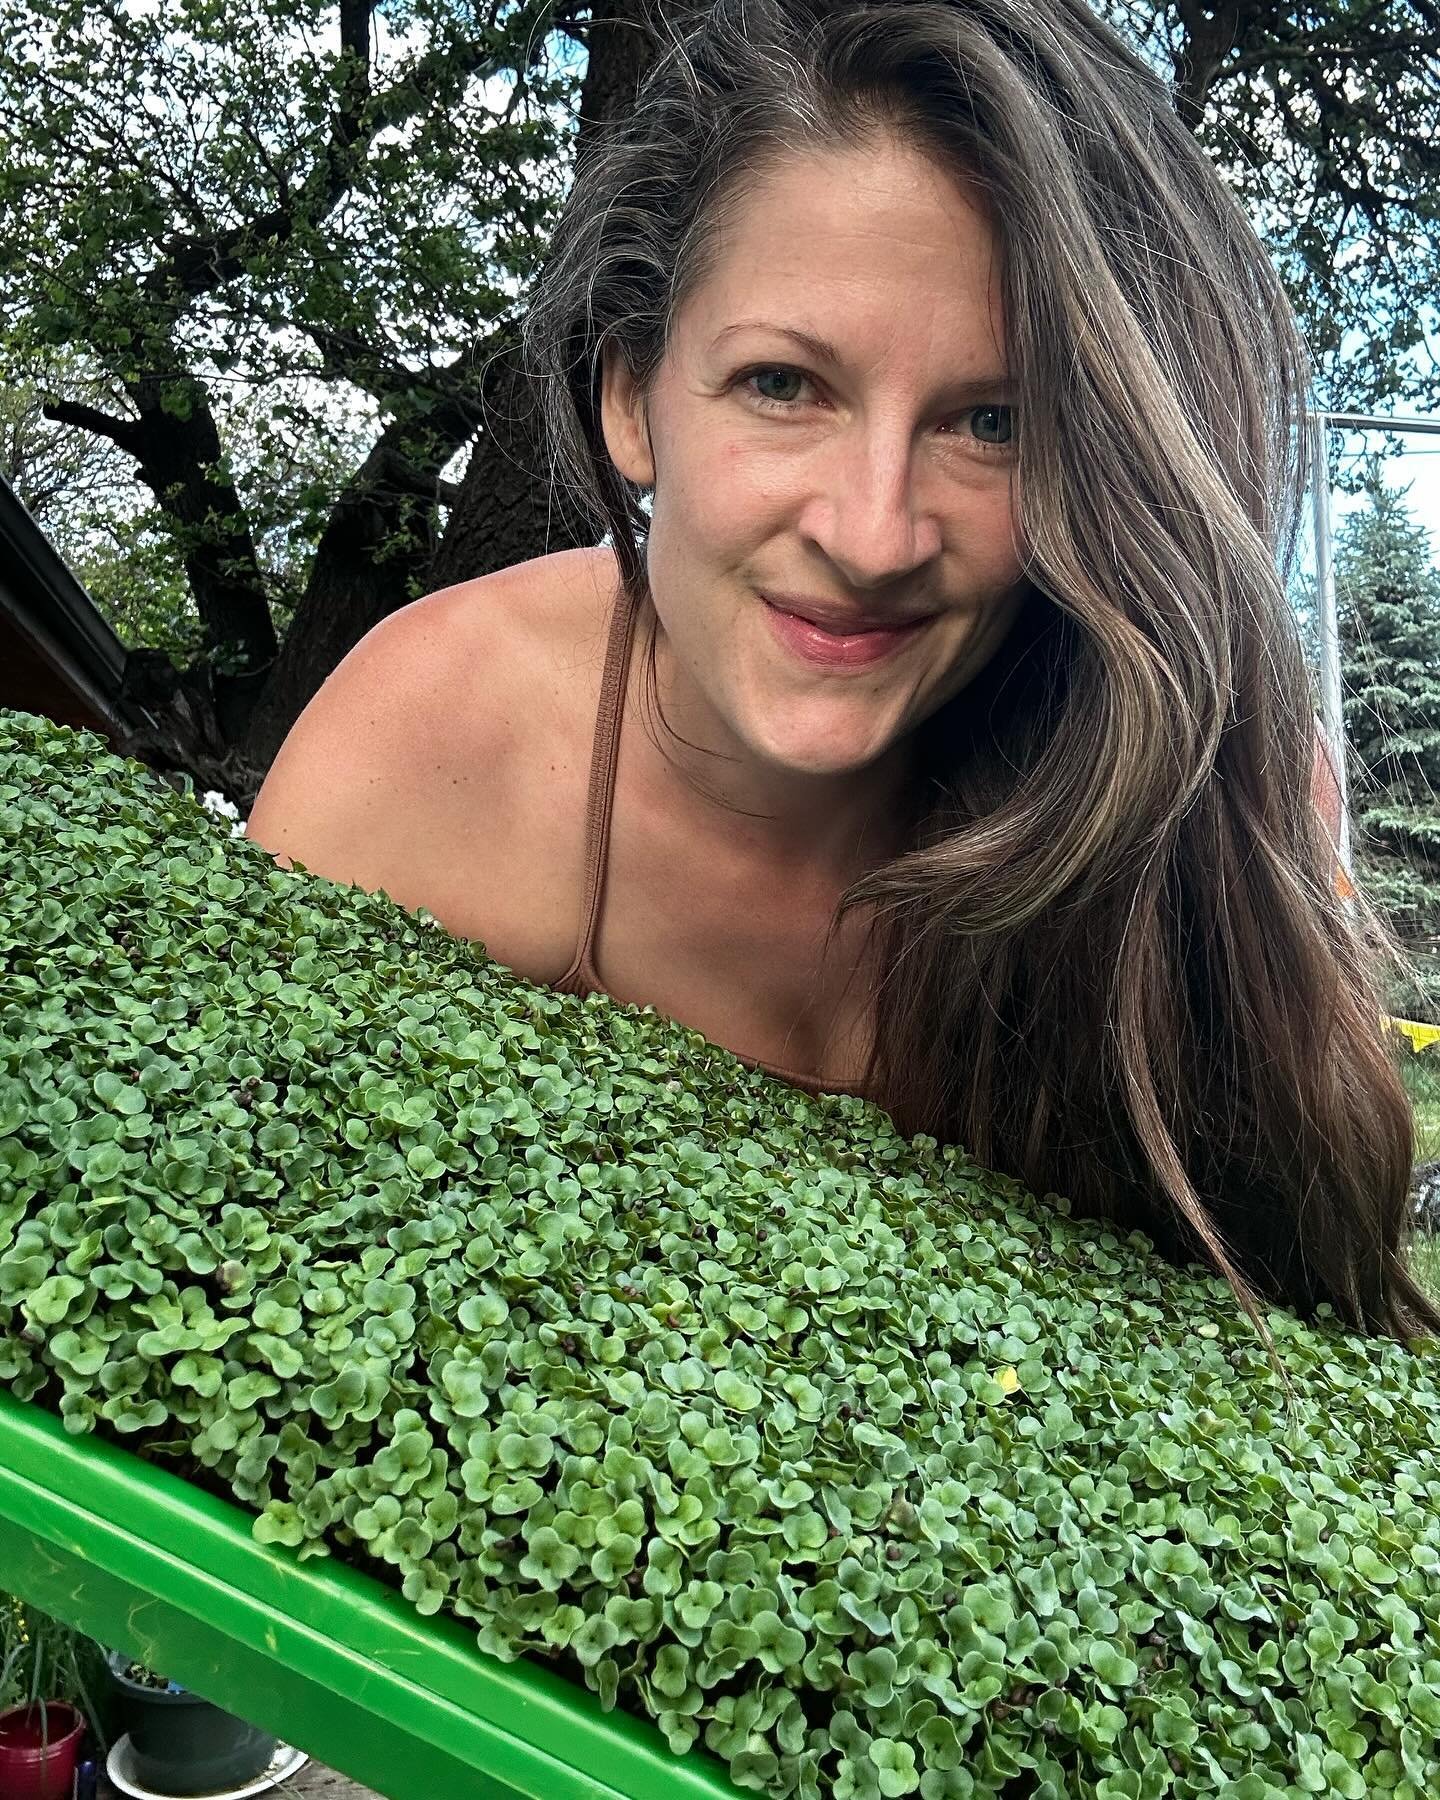 Winter is a litter rough around here for microgreens not quite right temps or humidity. But I&rsquo;m gonna start some more rounds up April 1st and that&rsquo;s no joke! Who&rsquo;s with me? Are you interested in growing micro greens or salad greens 